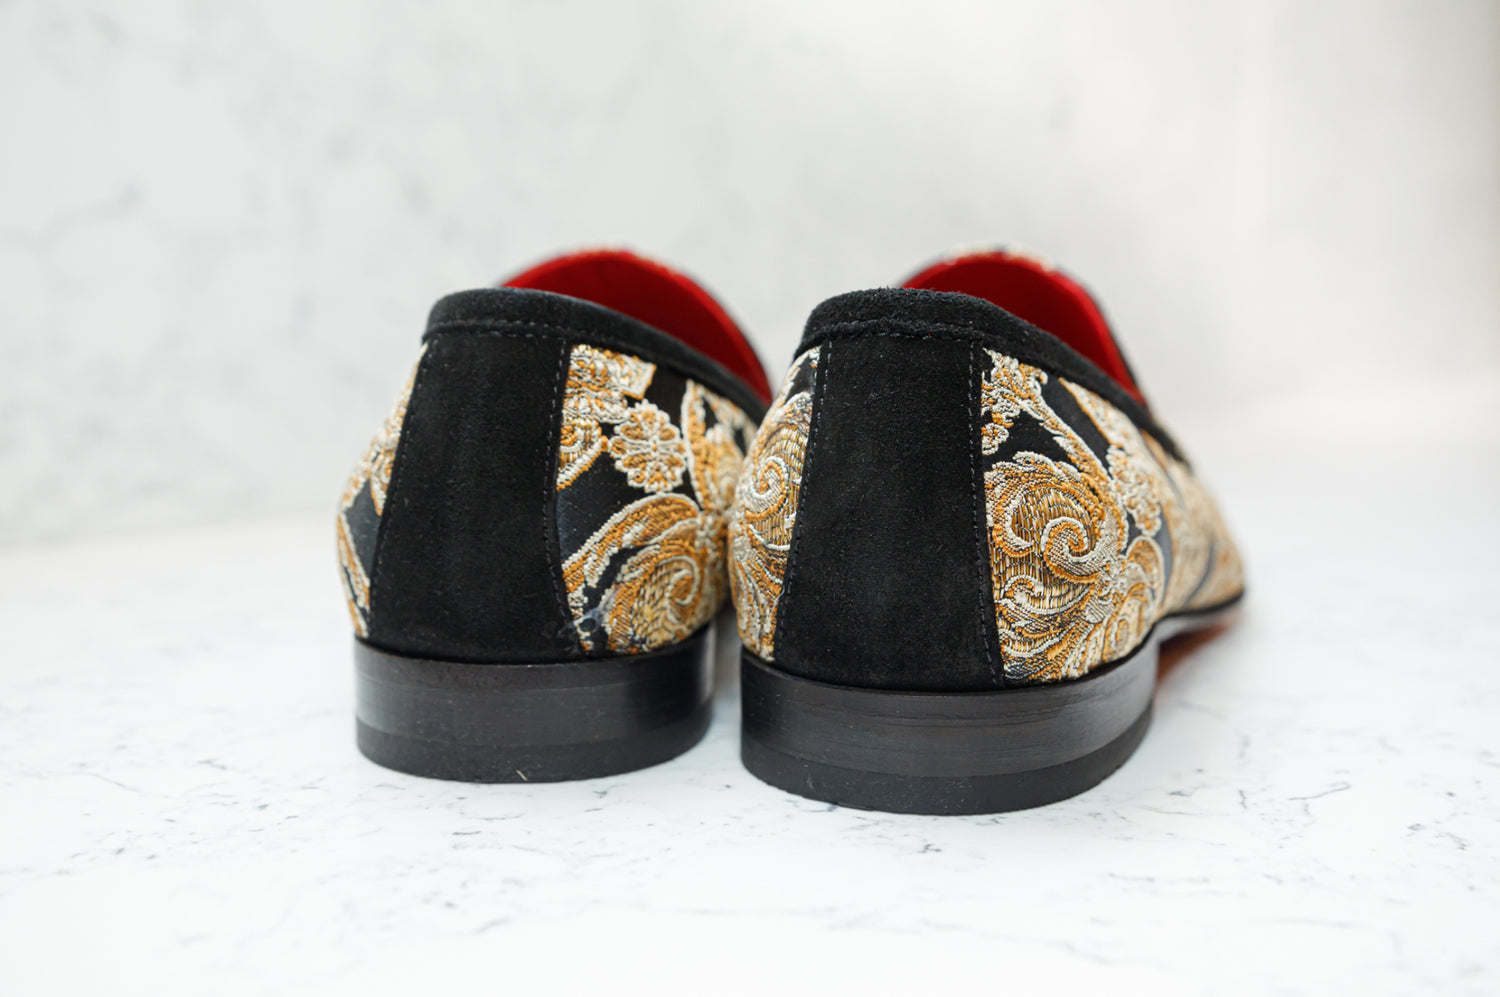 The Baroque Loafers - Black